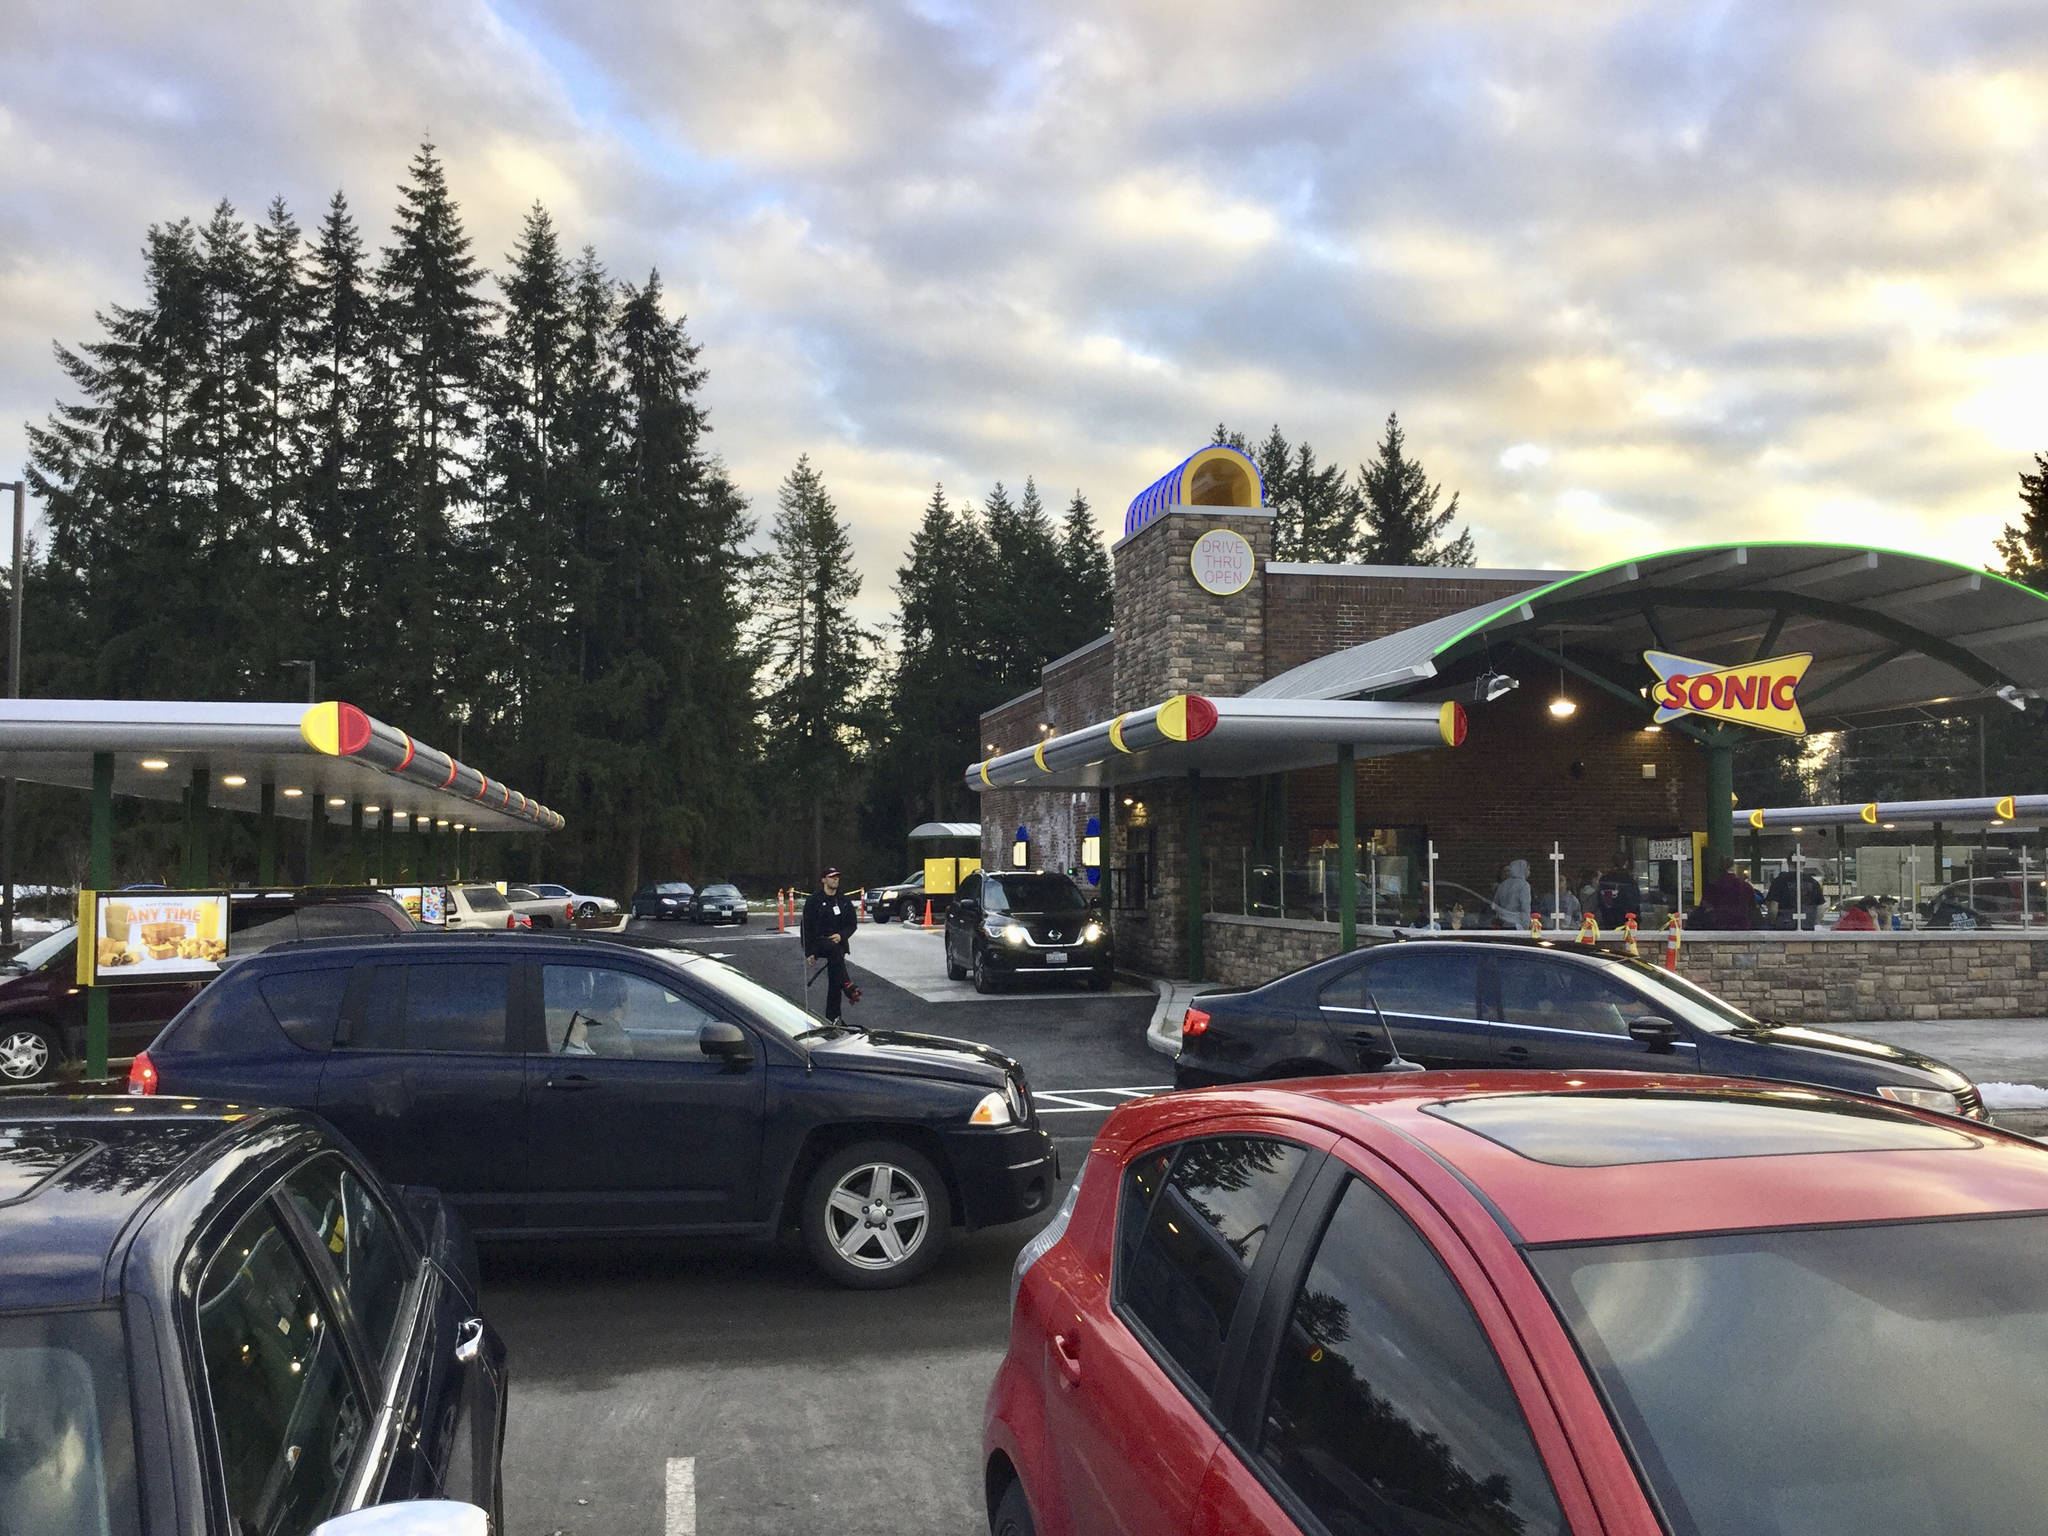 New Sonic Drive-In opens in Marysville to heavy traffic